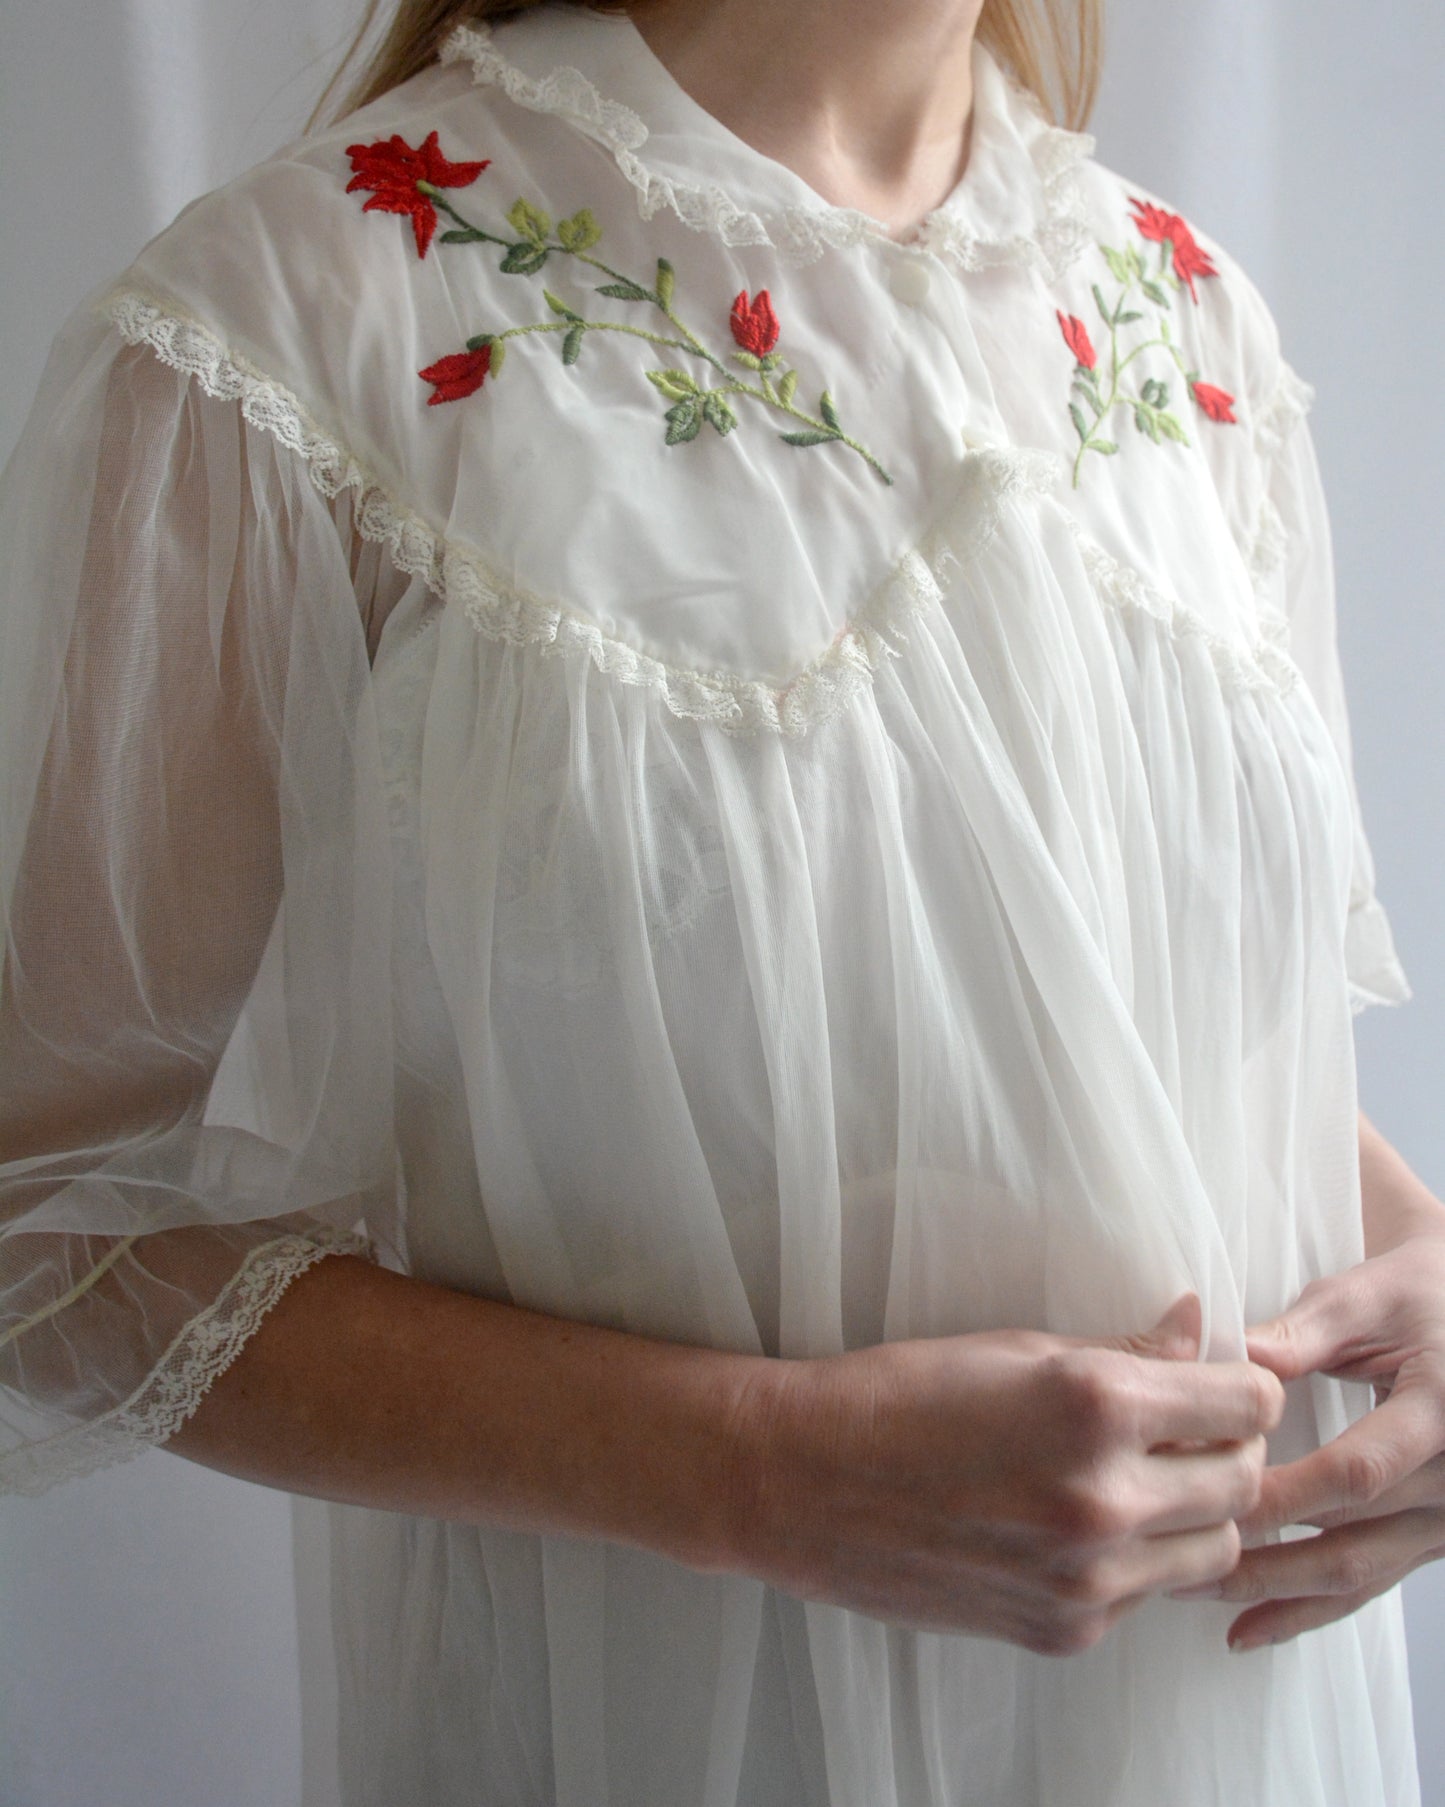 VINTAGE 1950s PEIGNOIR WITH ROSE EMBROIDERY